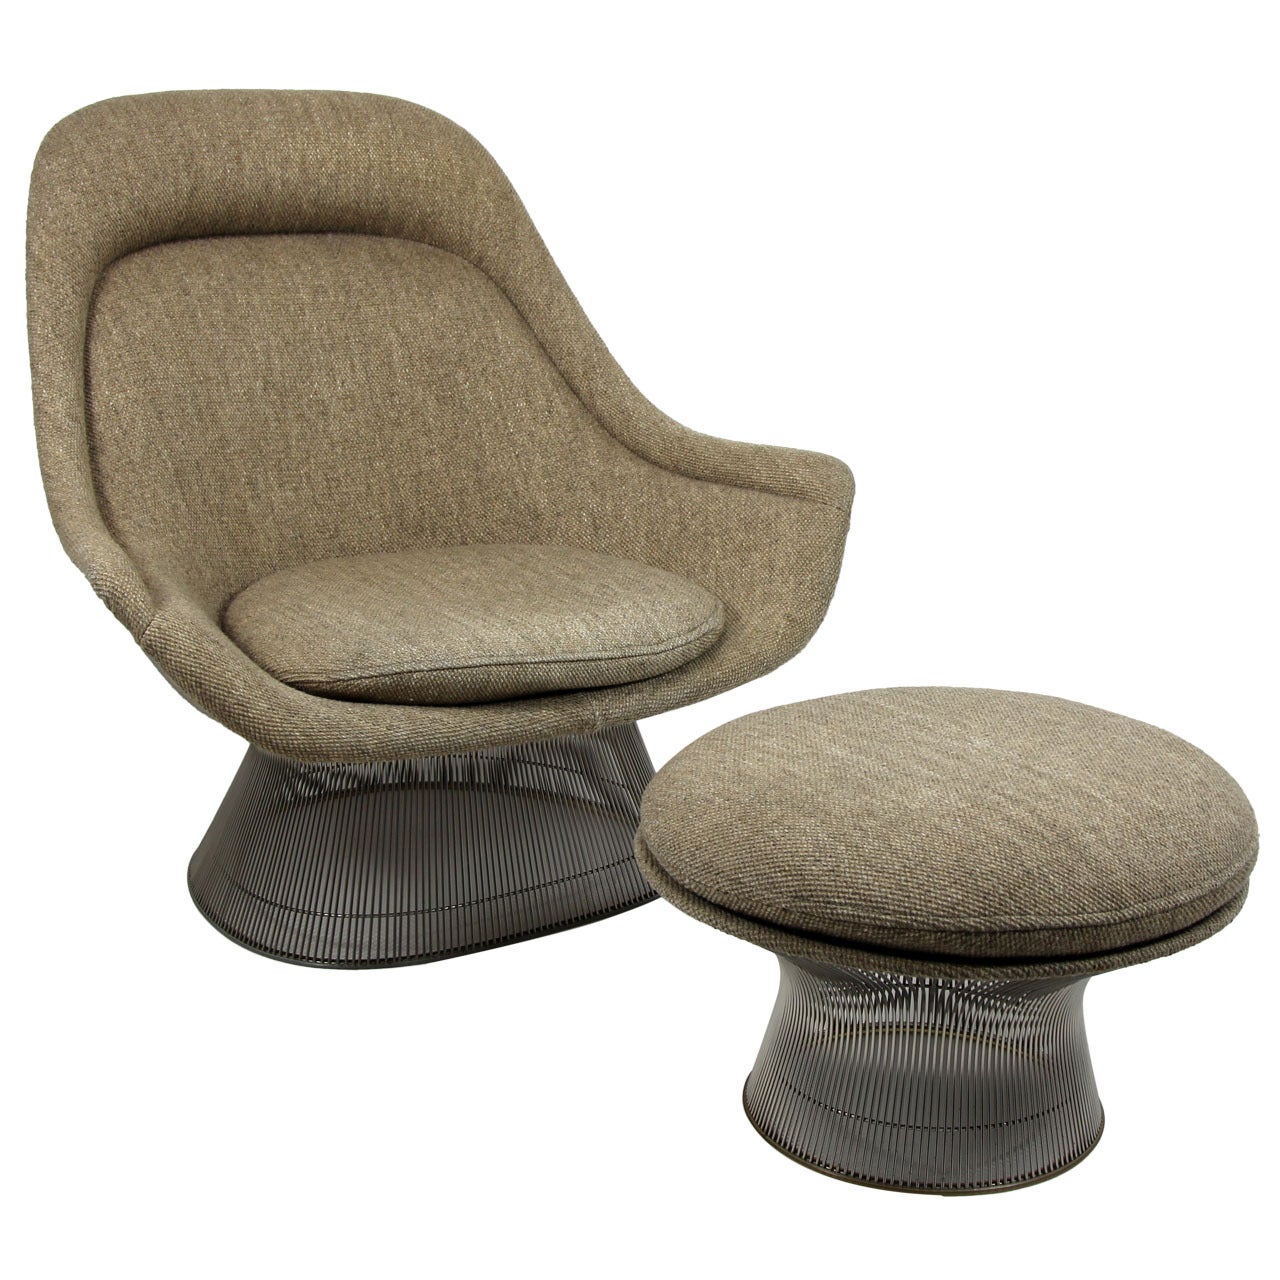 Warren Platner for Knoll Easy Chair Lounge and Ottoman